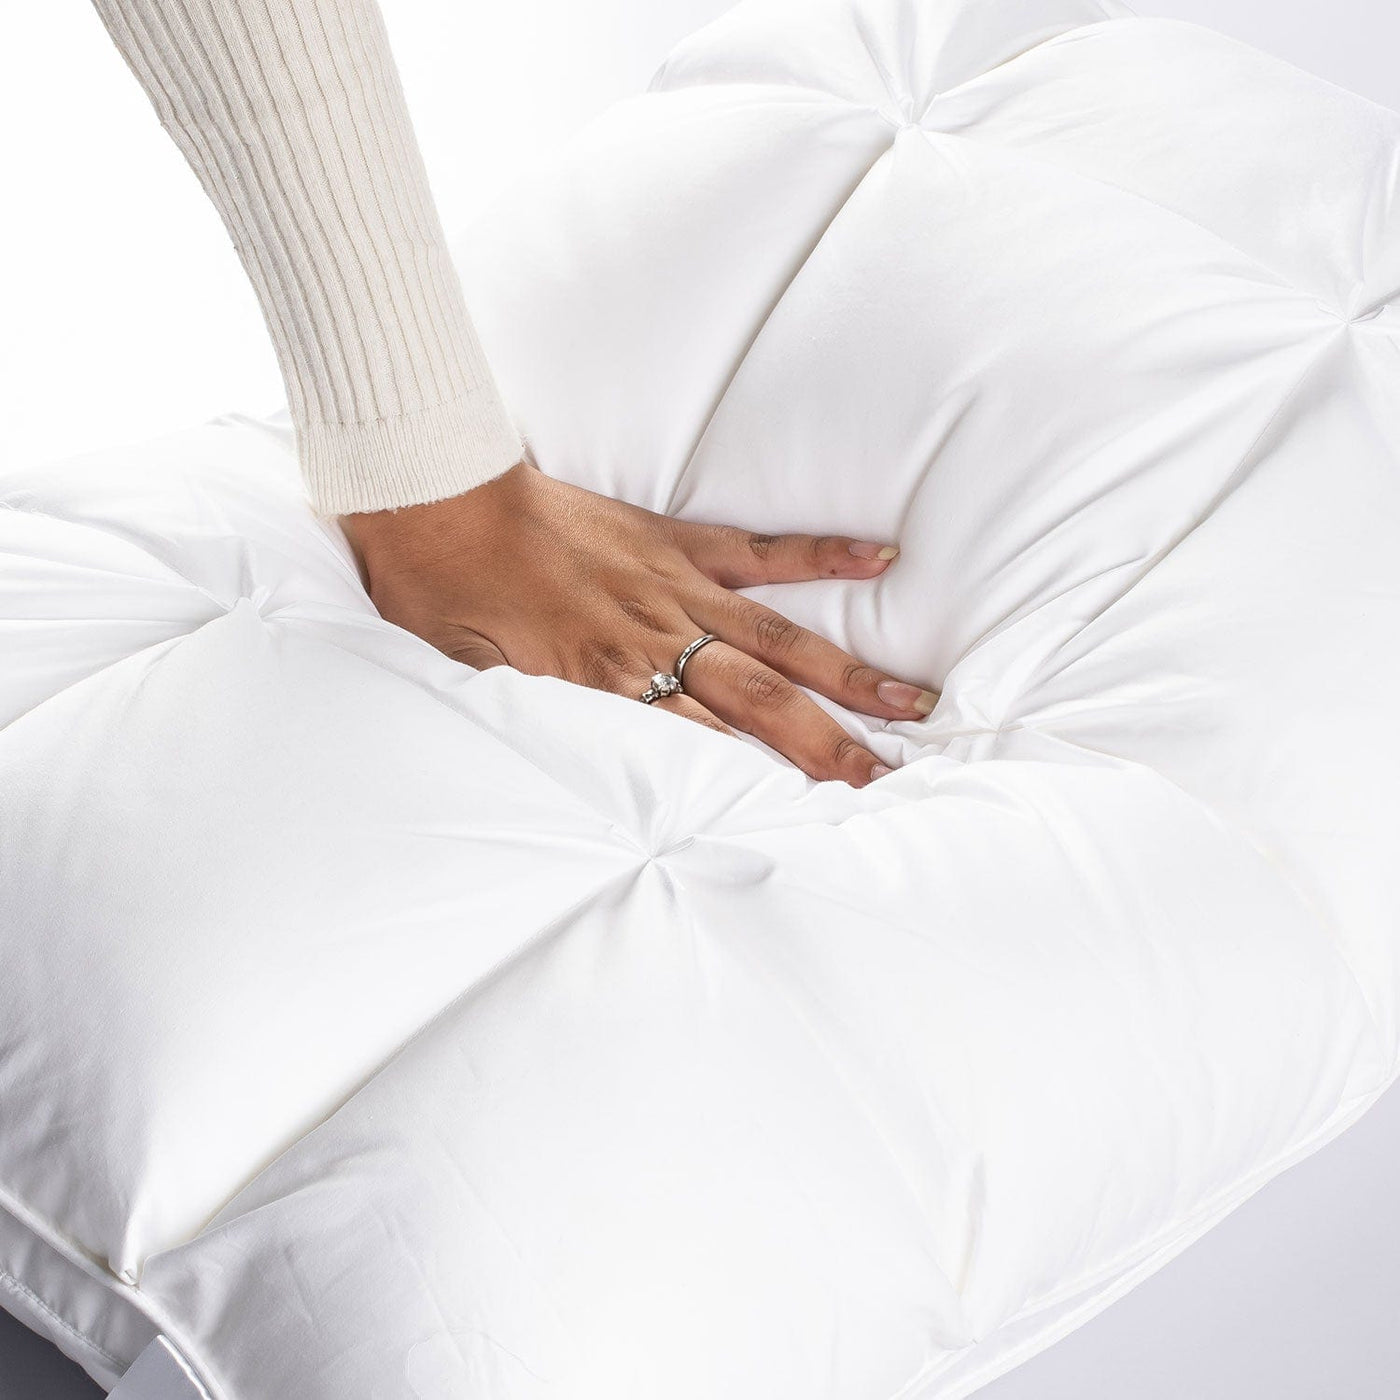 Cervical 3 Layer Hypoallergic Pillow | Cervical Pillow Price – Spread Home